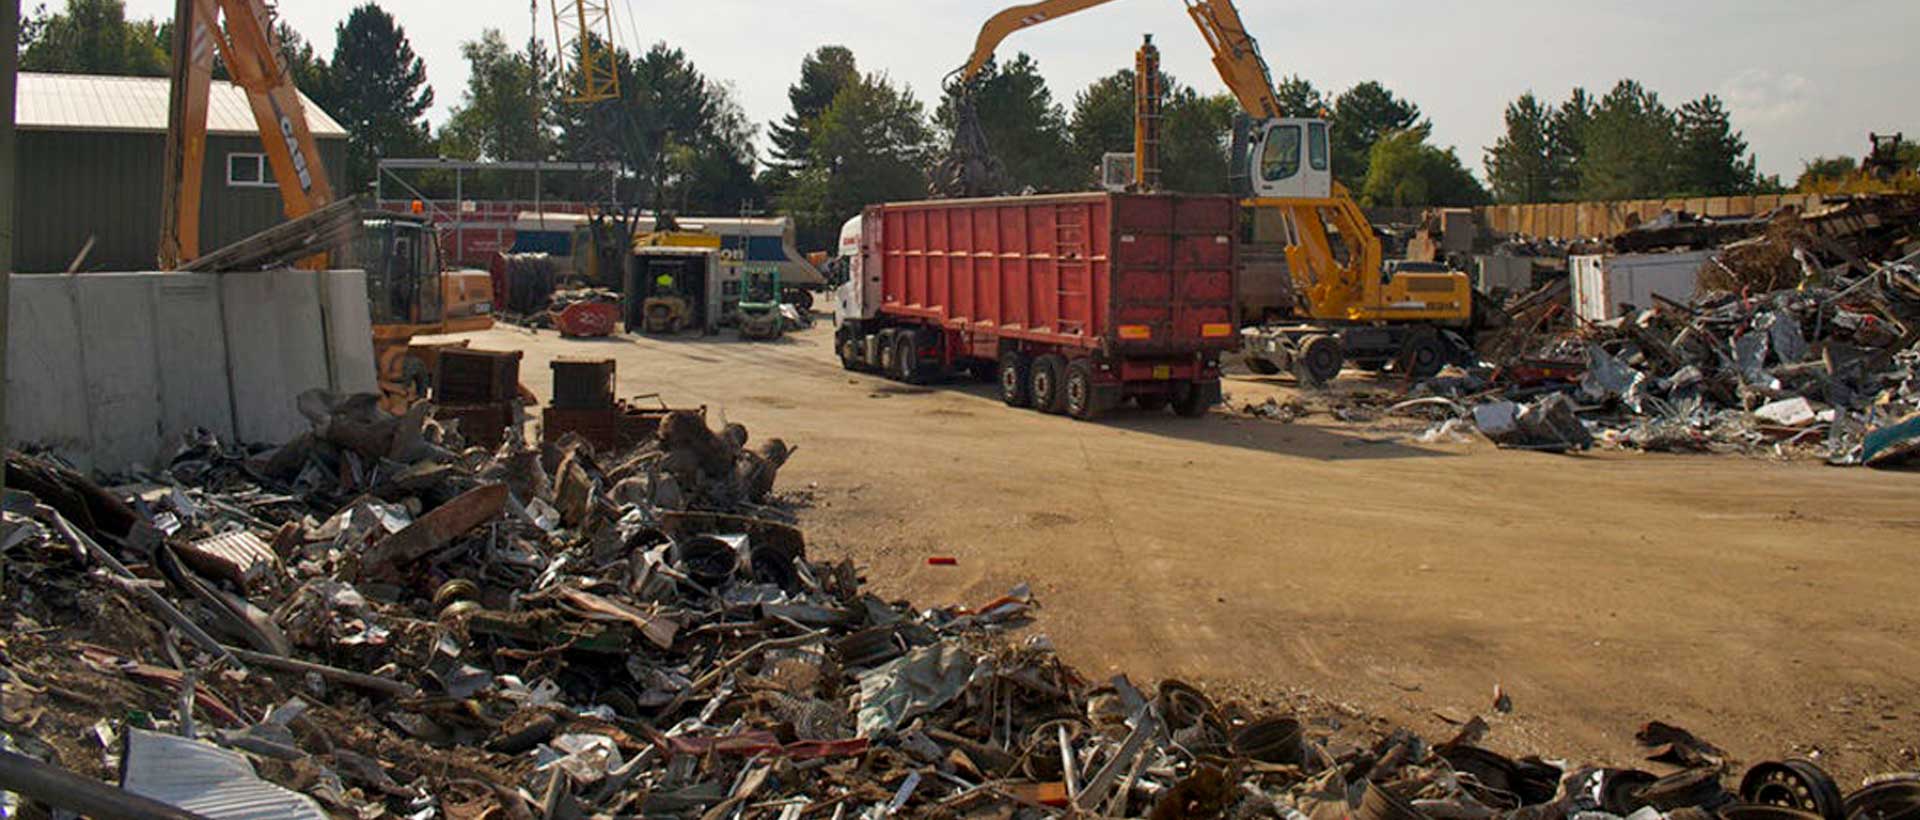 Recycling Site and Equipment